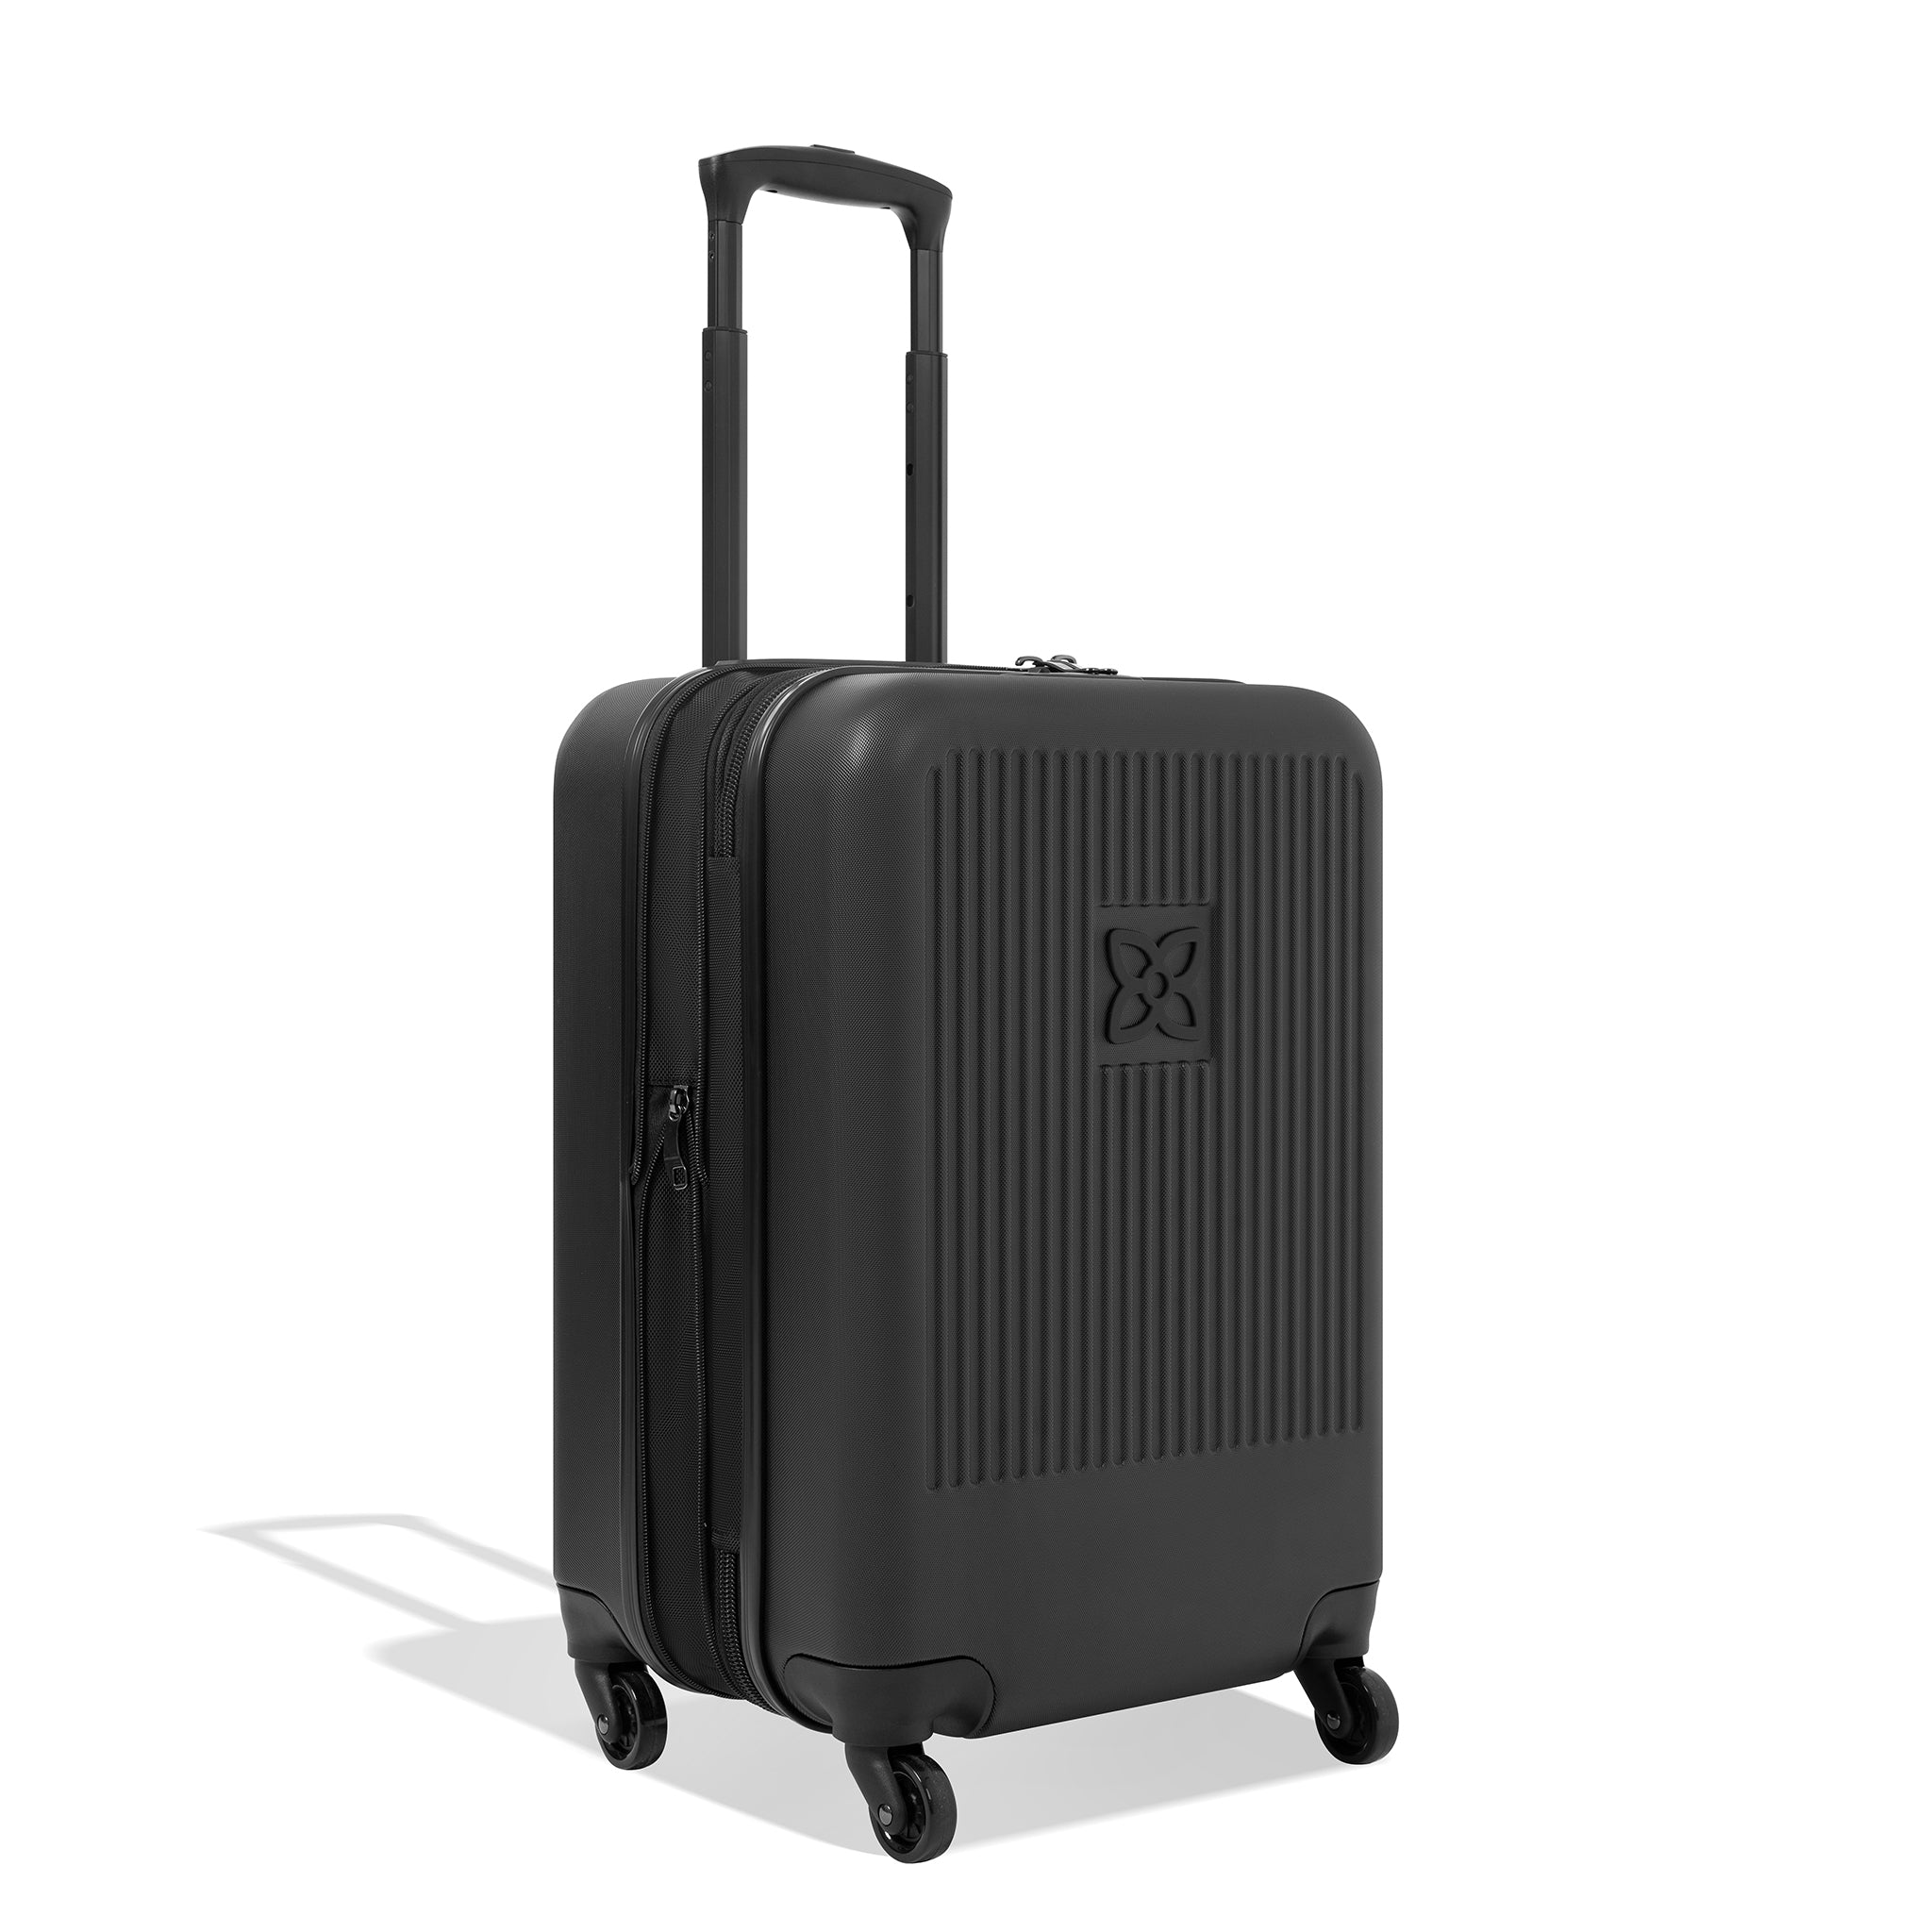 Angled front view of Sherpani hard-shell carry-on luggage, the Meridian in Black. Meridian features include a retractable luggage handle, uncrushable exterior, TSA-approved locking zippers and four 36-degree spinner wheels. 